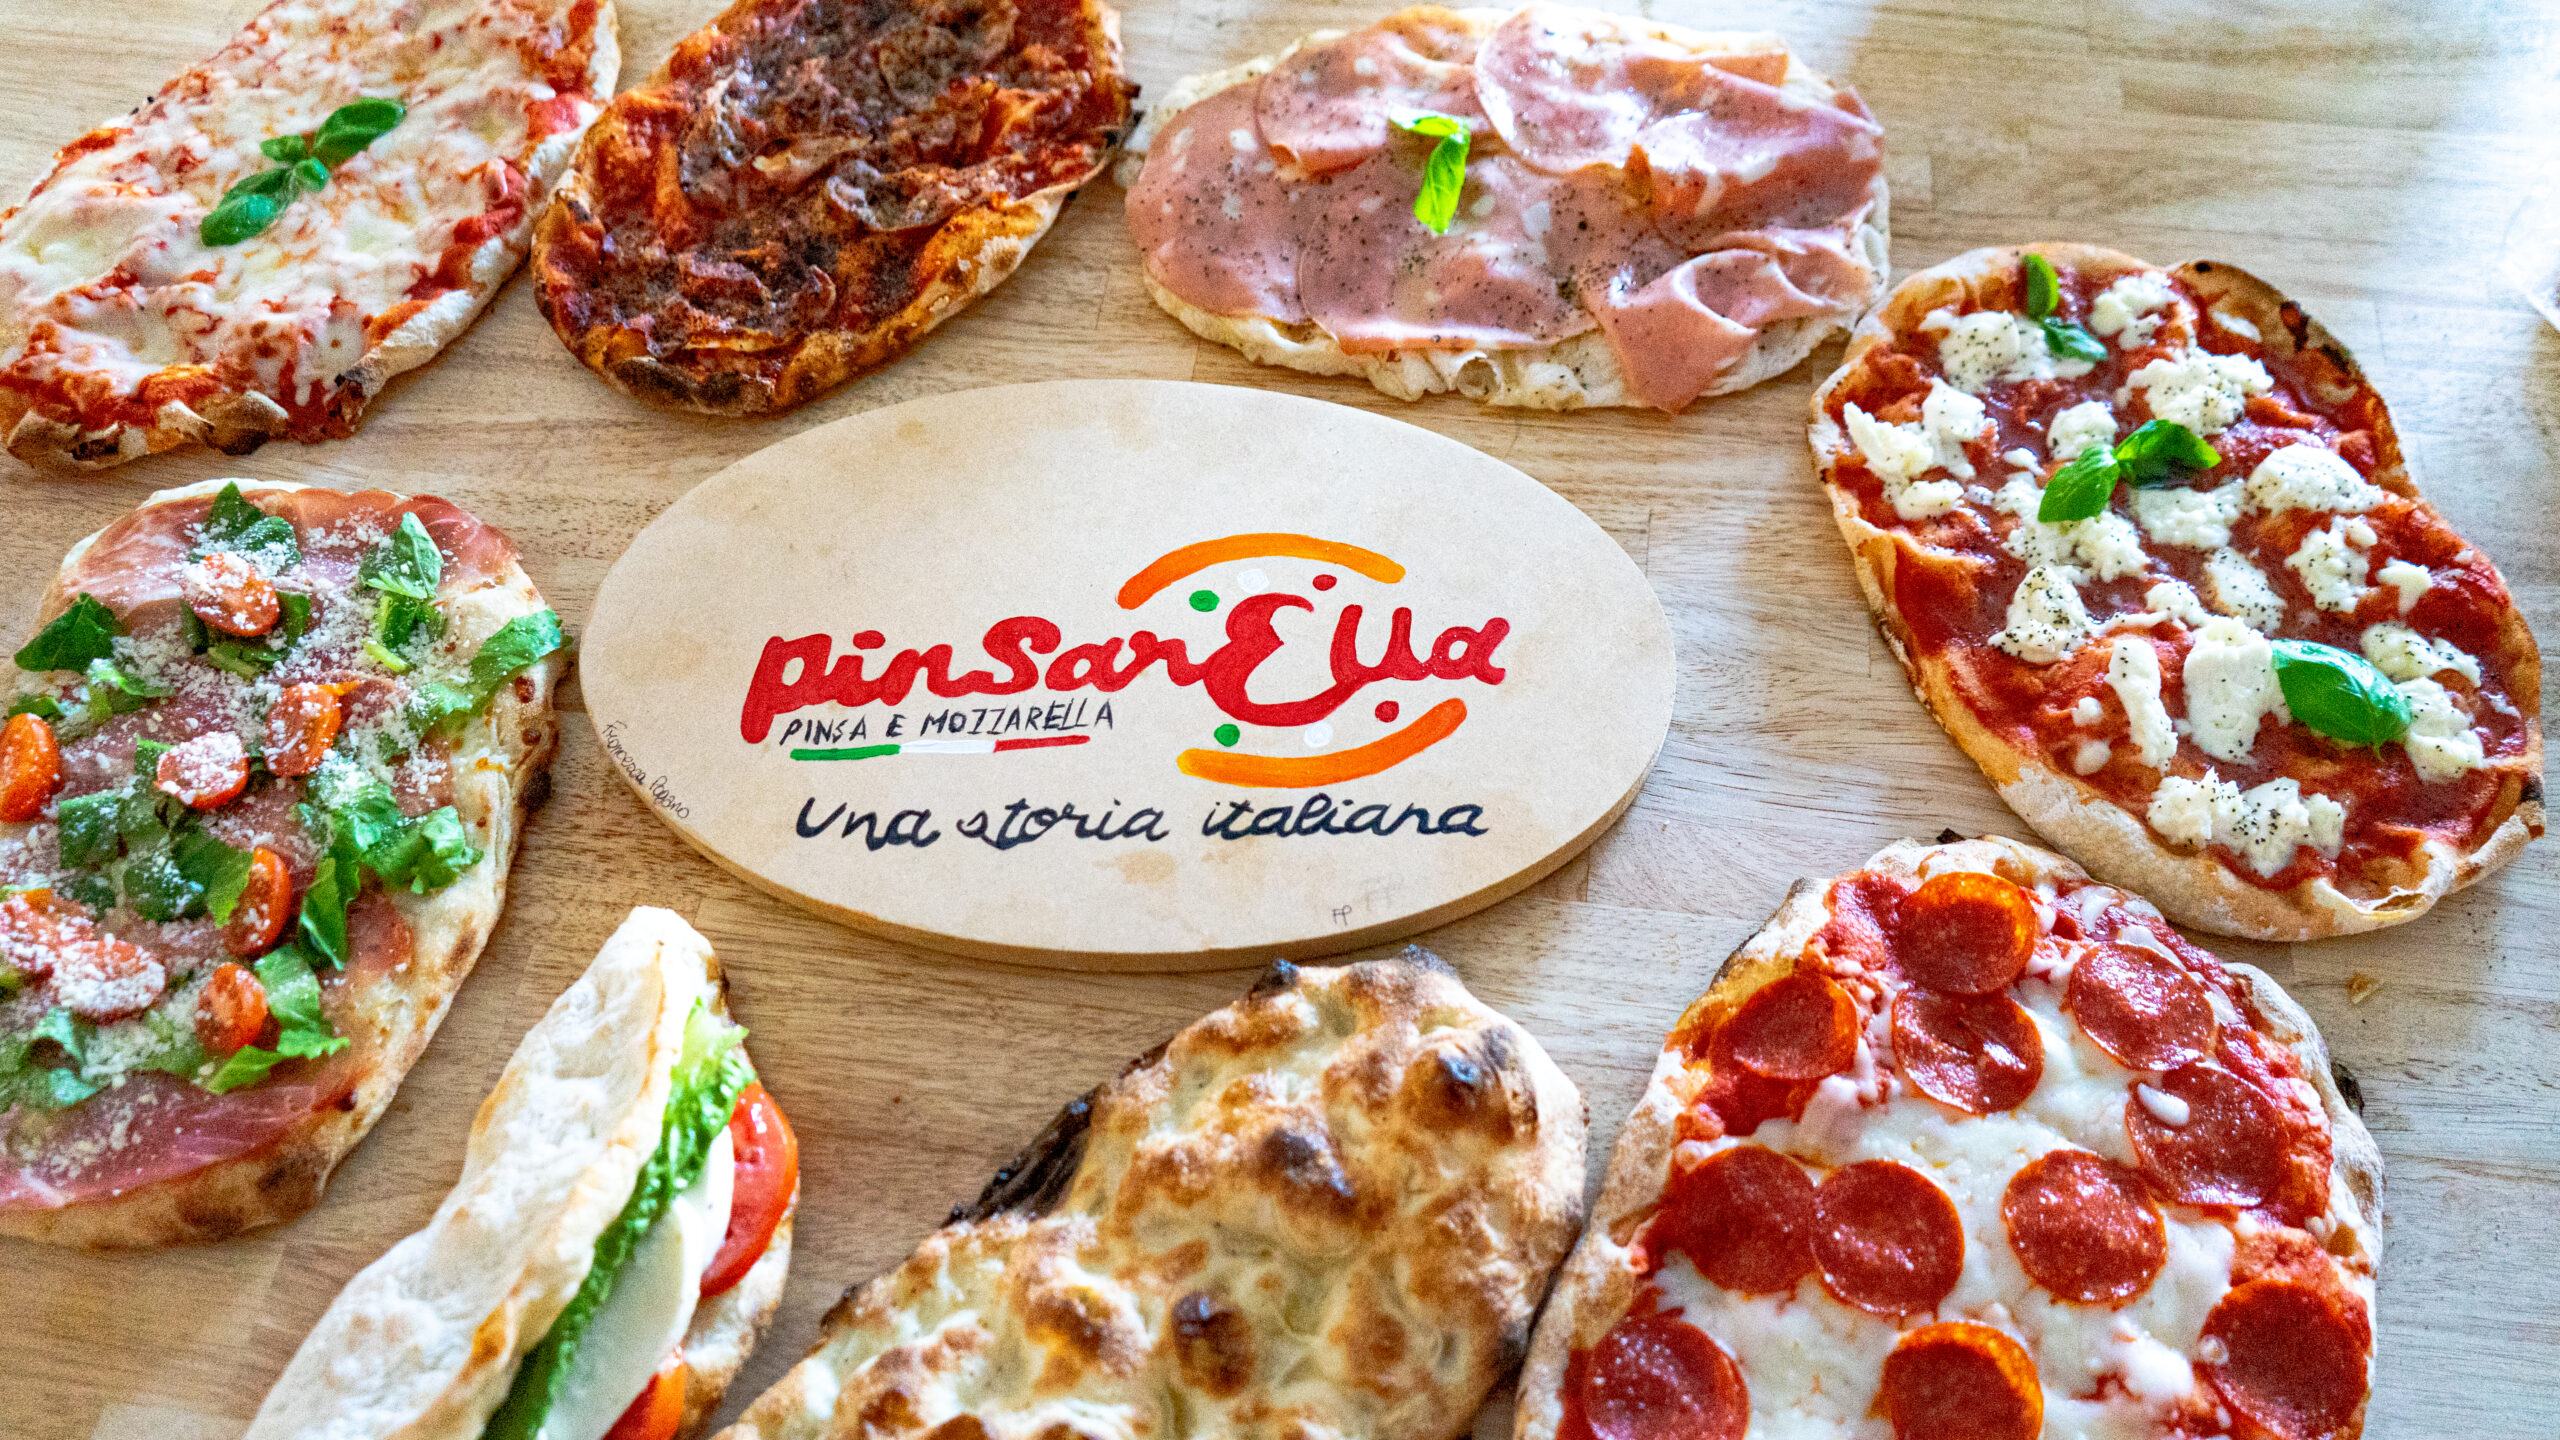 Business Pizza Your To Easy Add Menu - Solutions Way the Roman